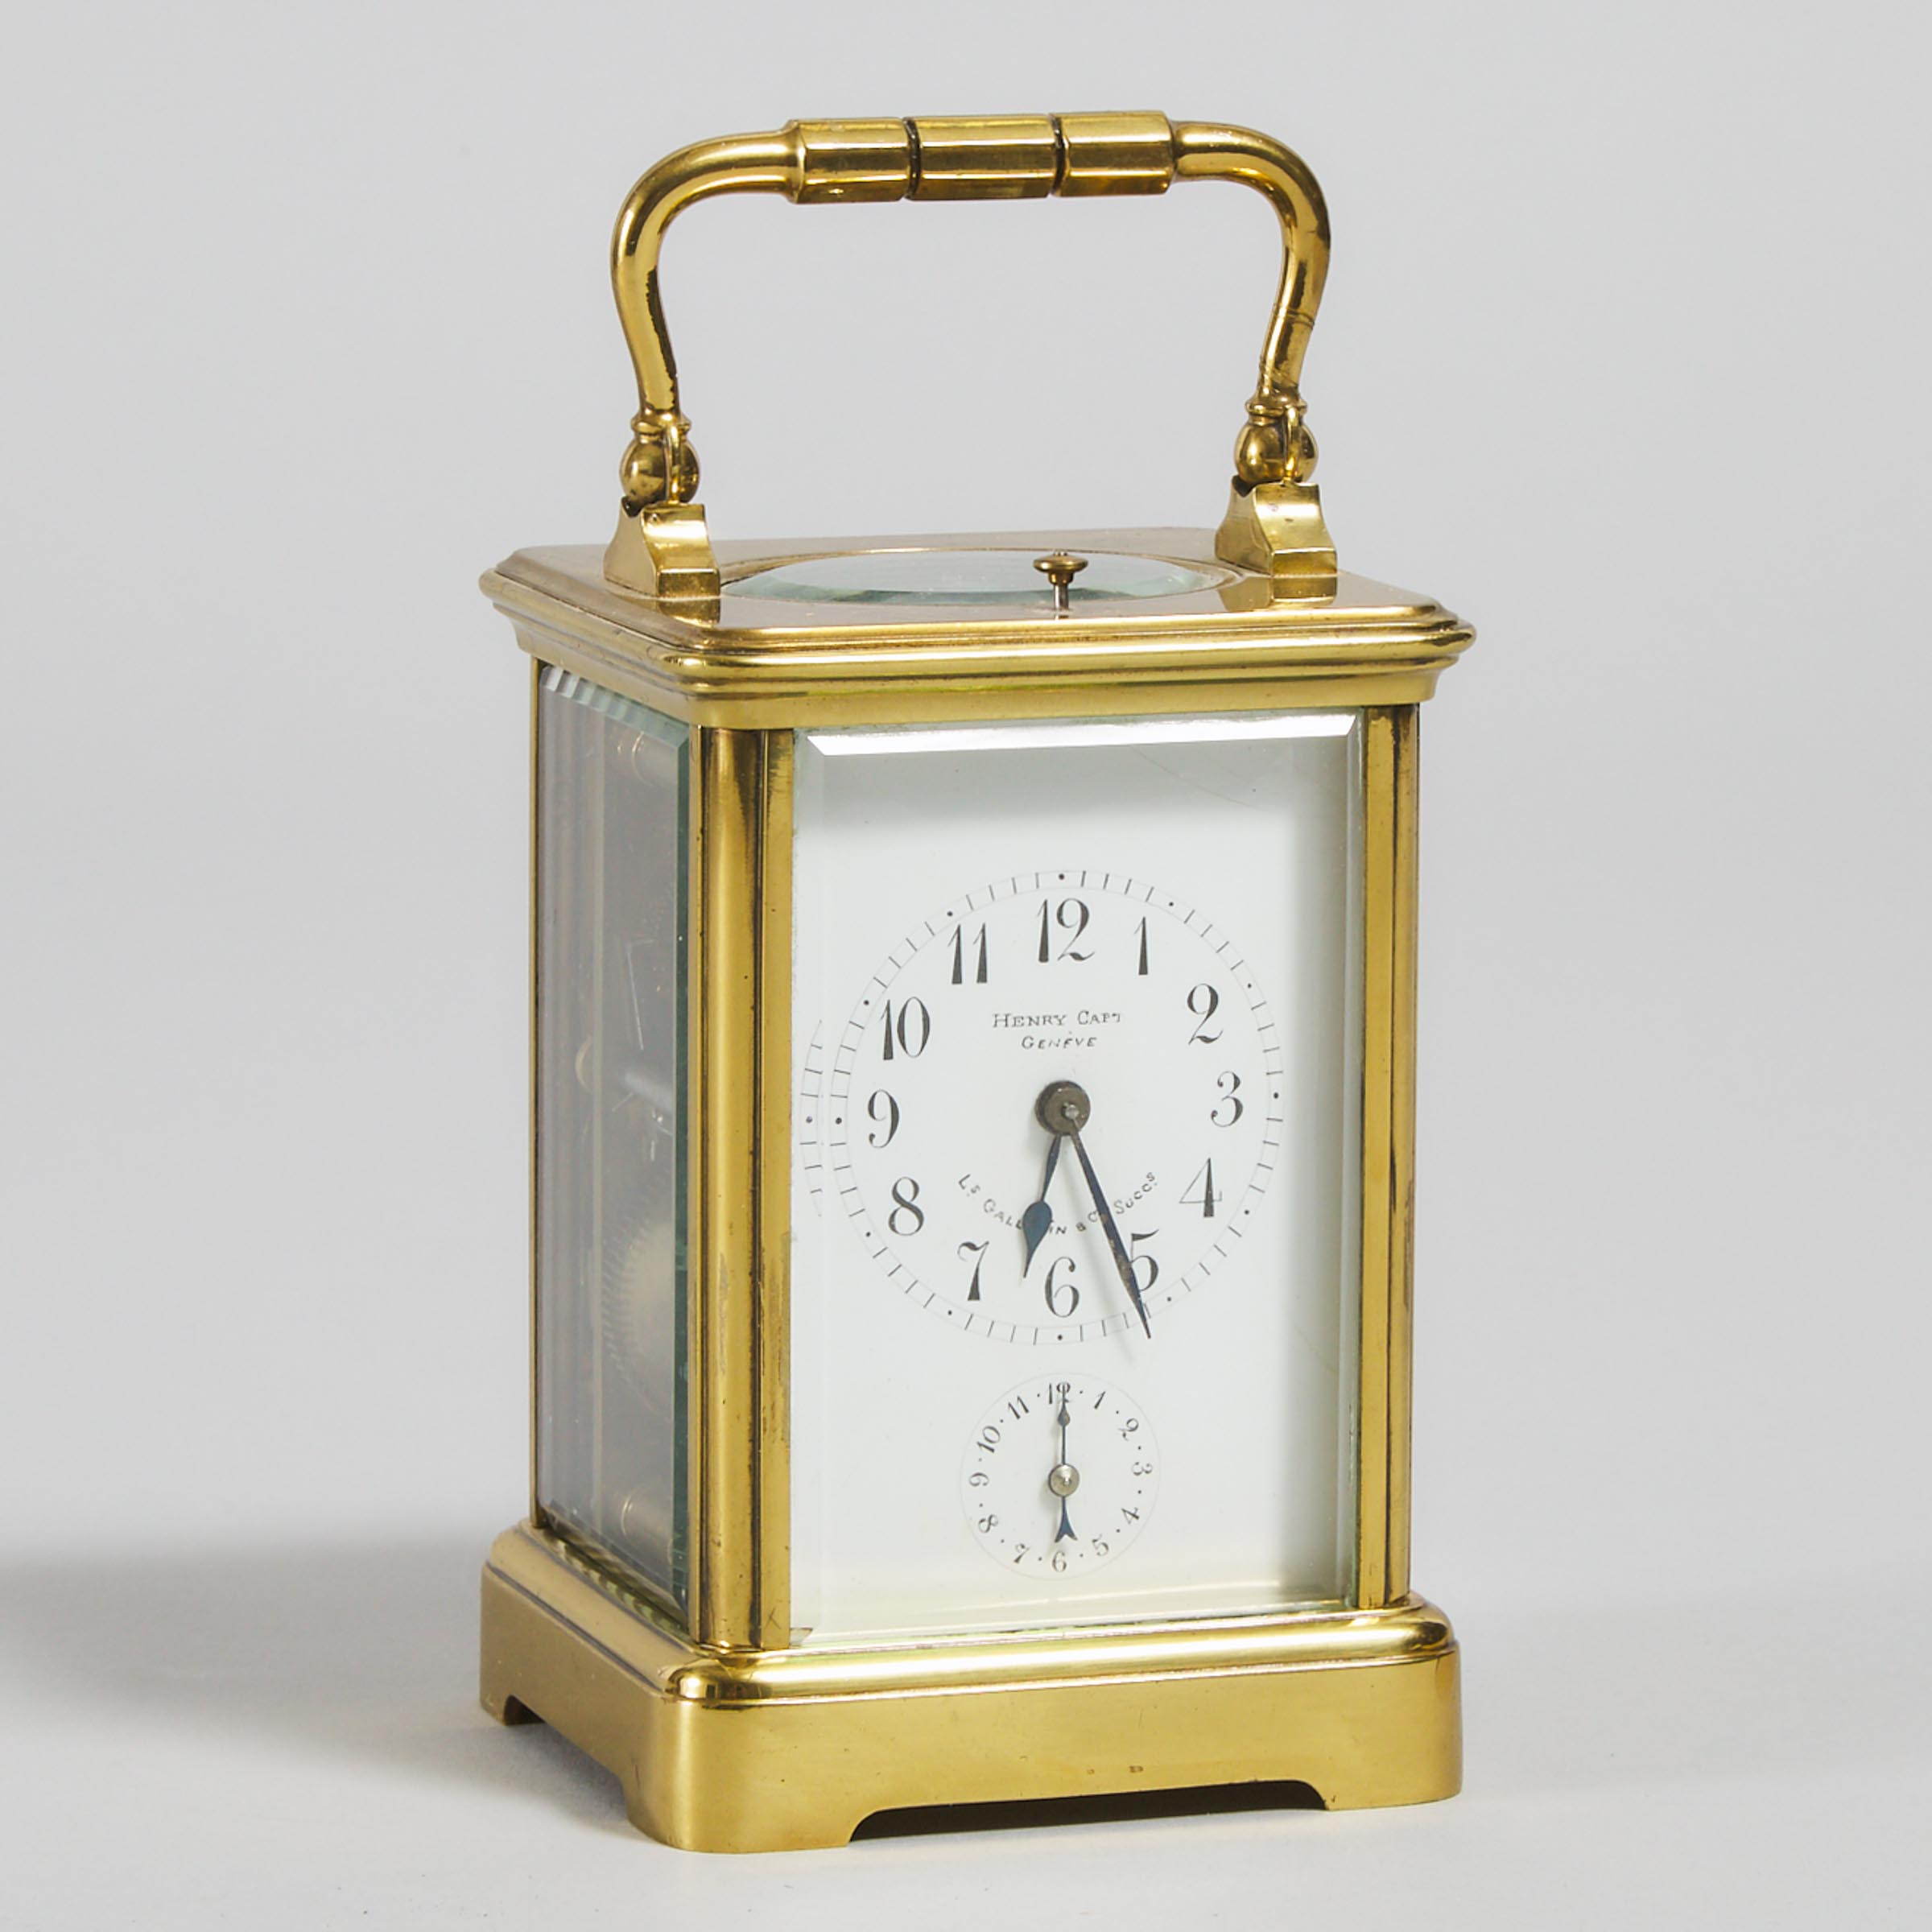 French Striking and Repeating Carriage Clock with Alarm, c.1895